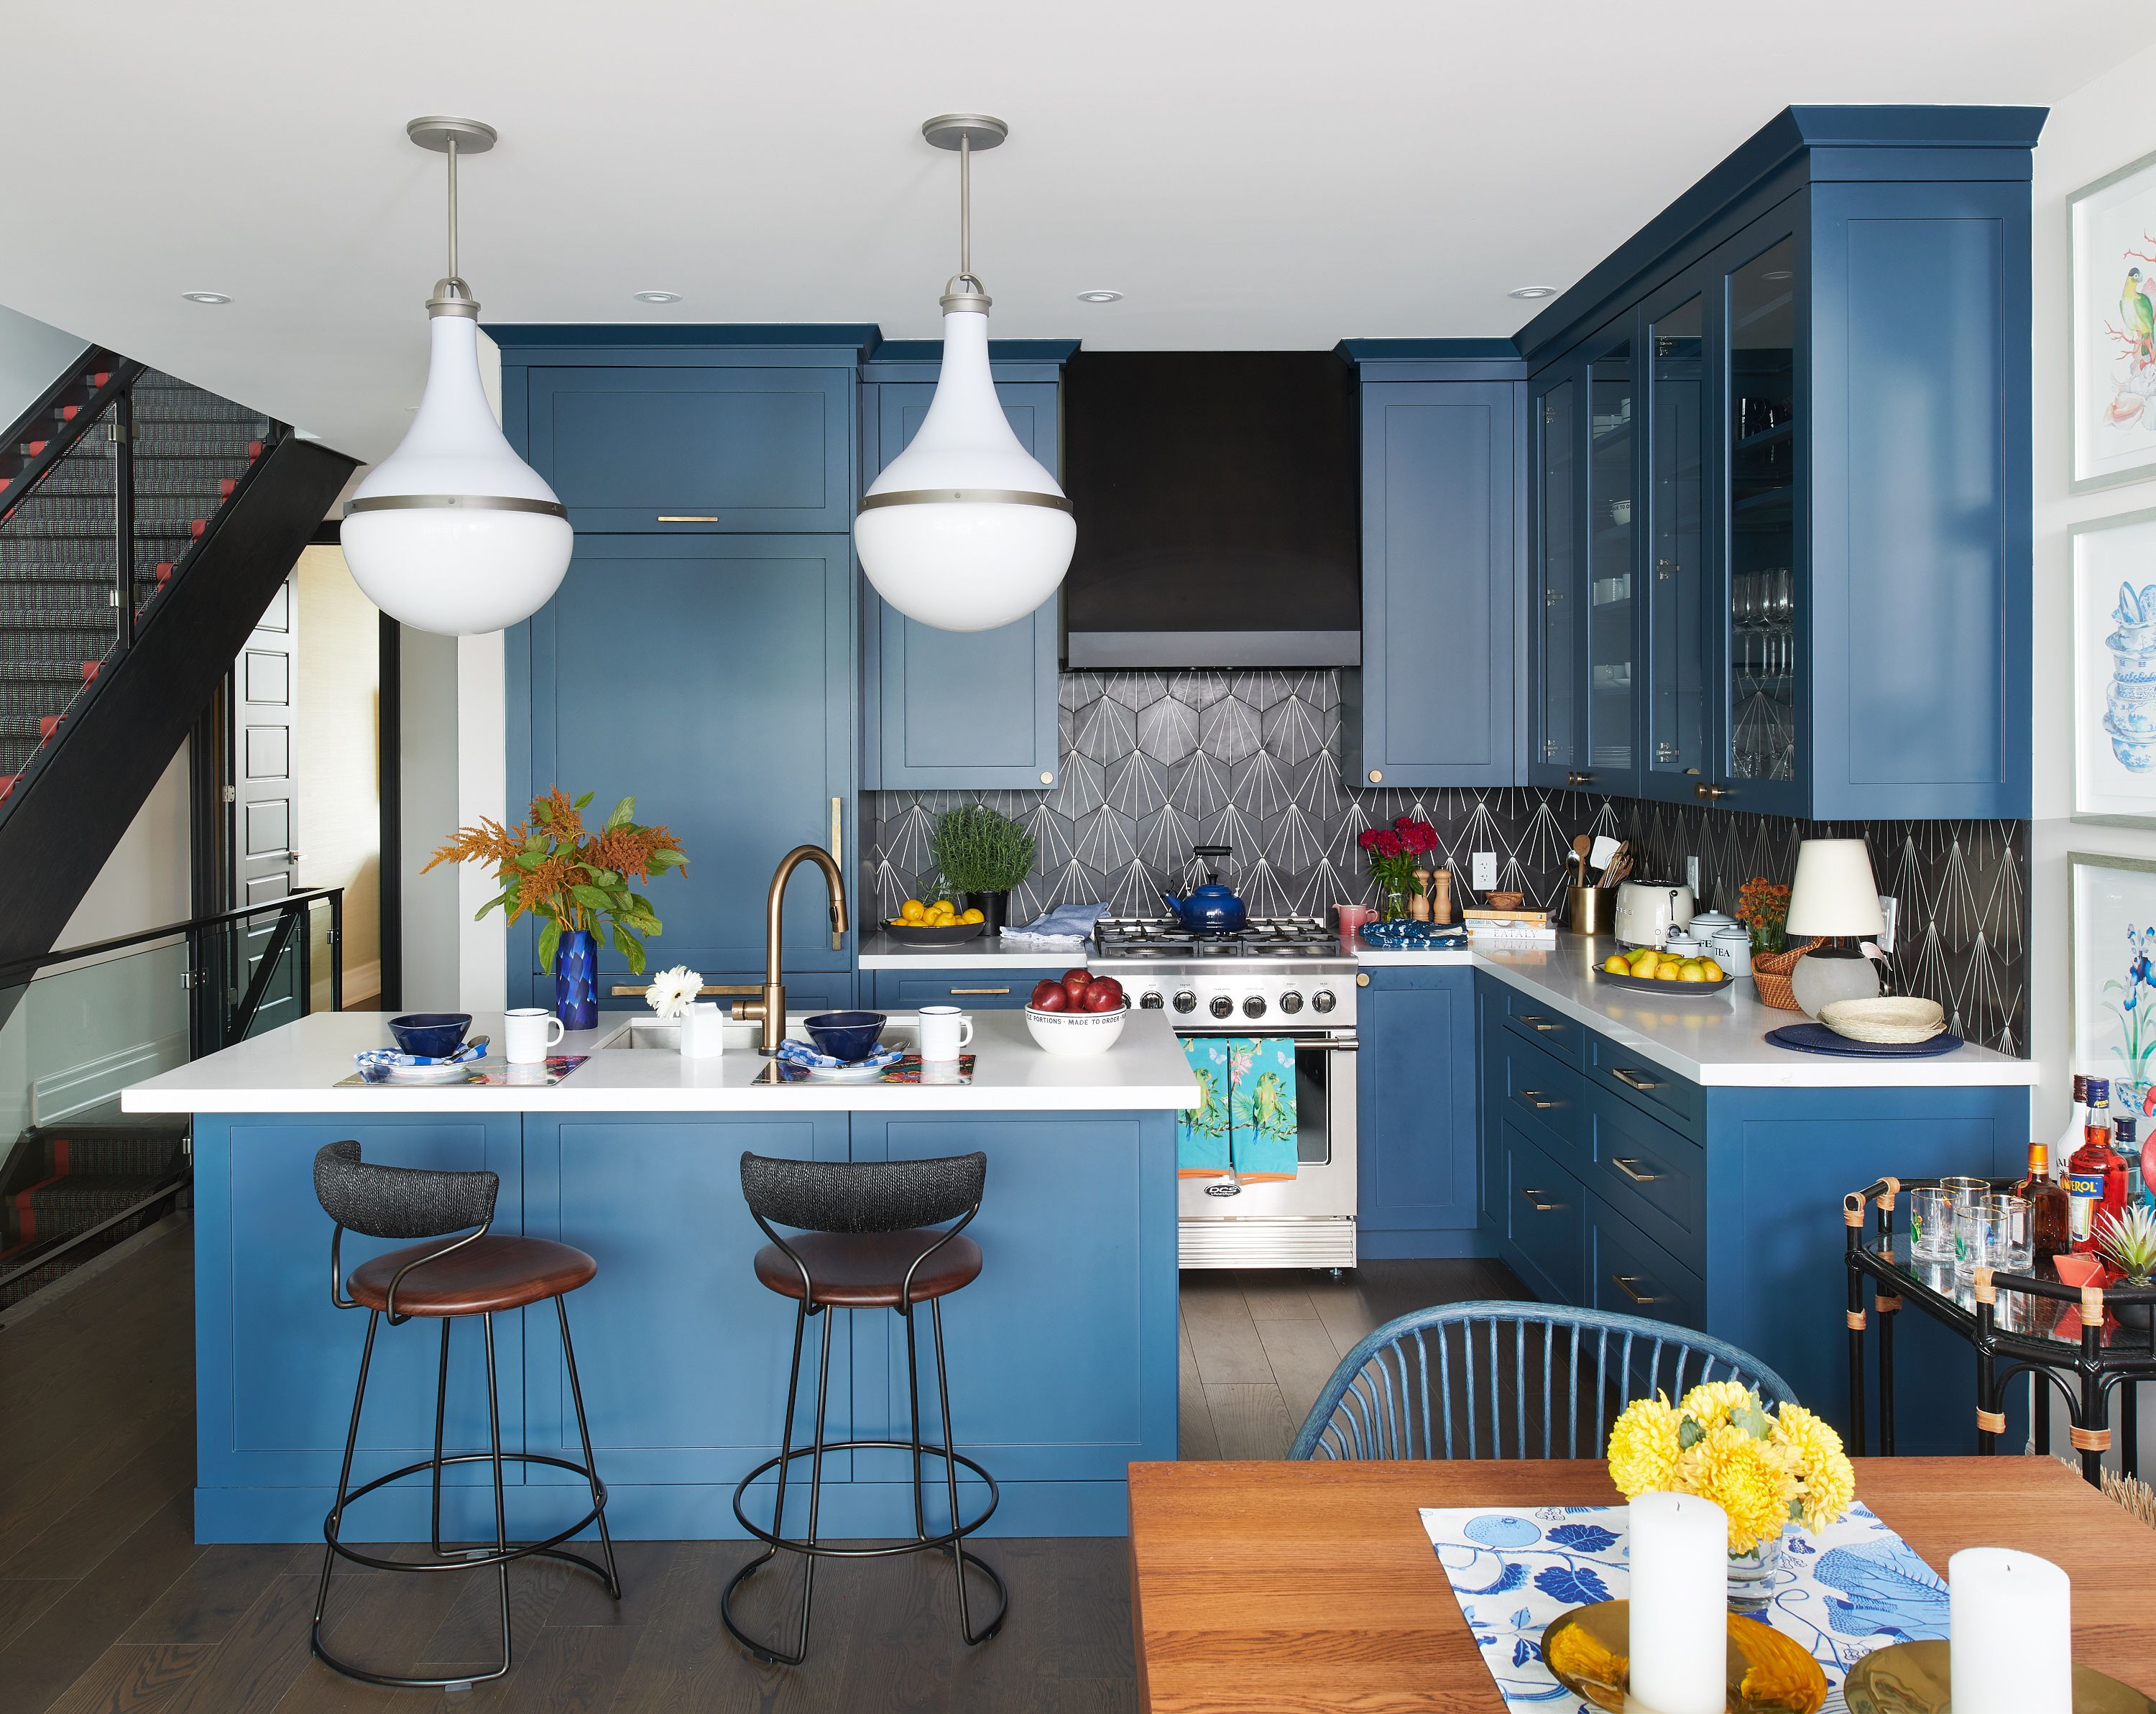 20 Blue Kitchen Ideas   Lovely Ways to Use Blue Cabinets and Decor ...